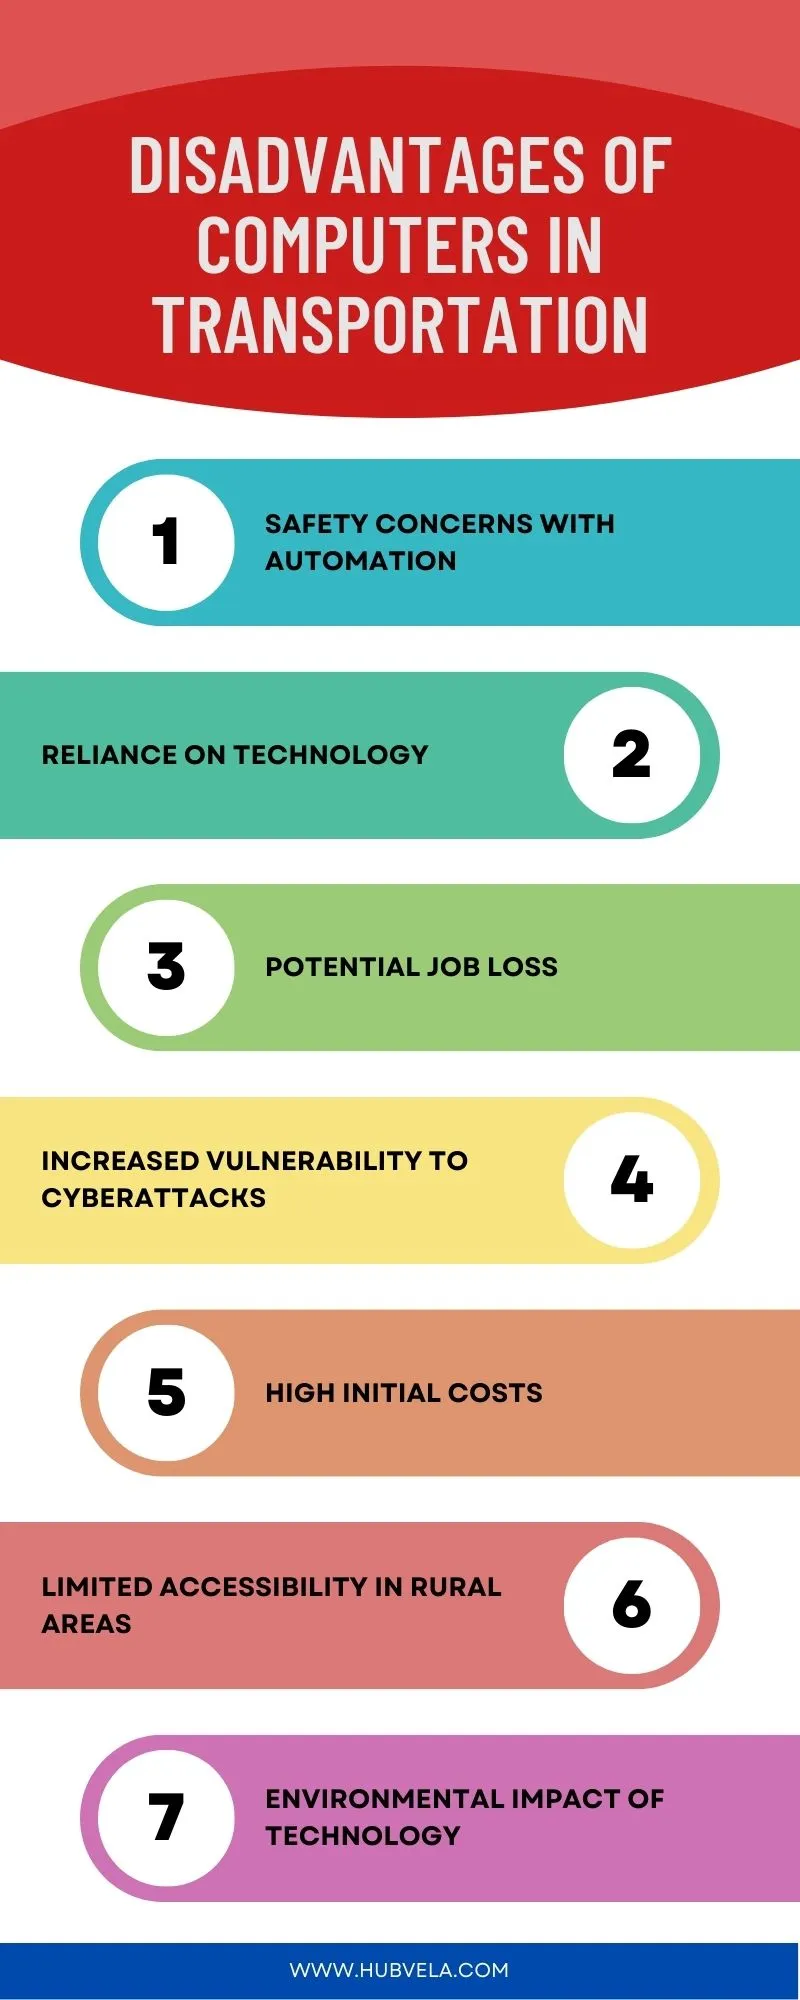 Disadvantages of Computers in Transportation Infographic